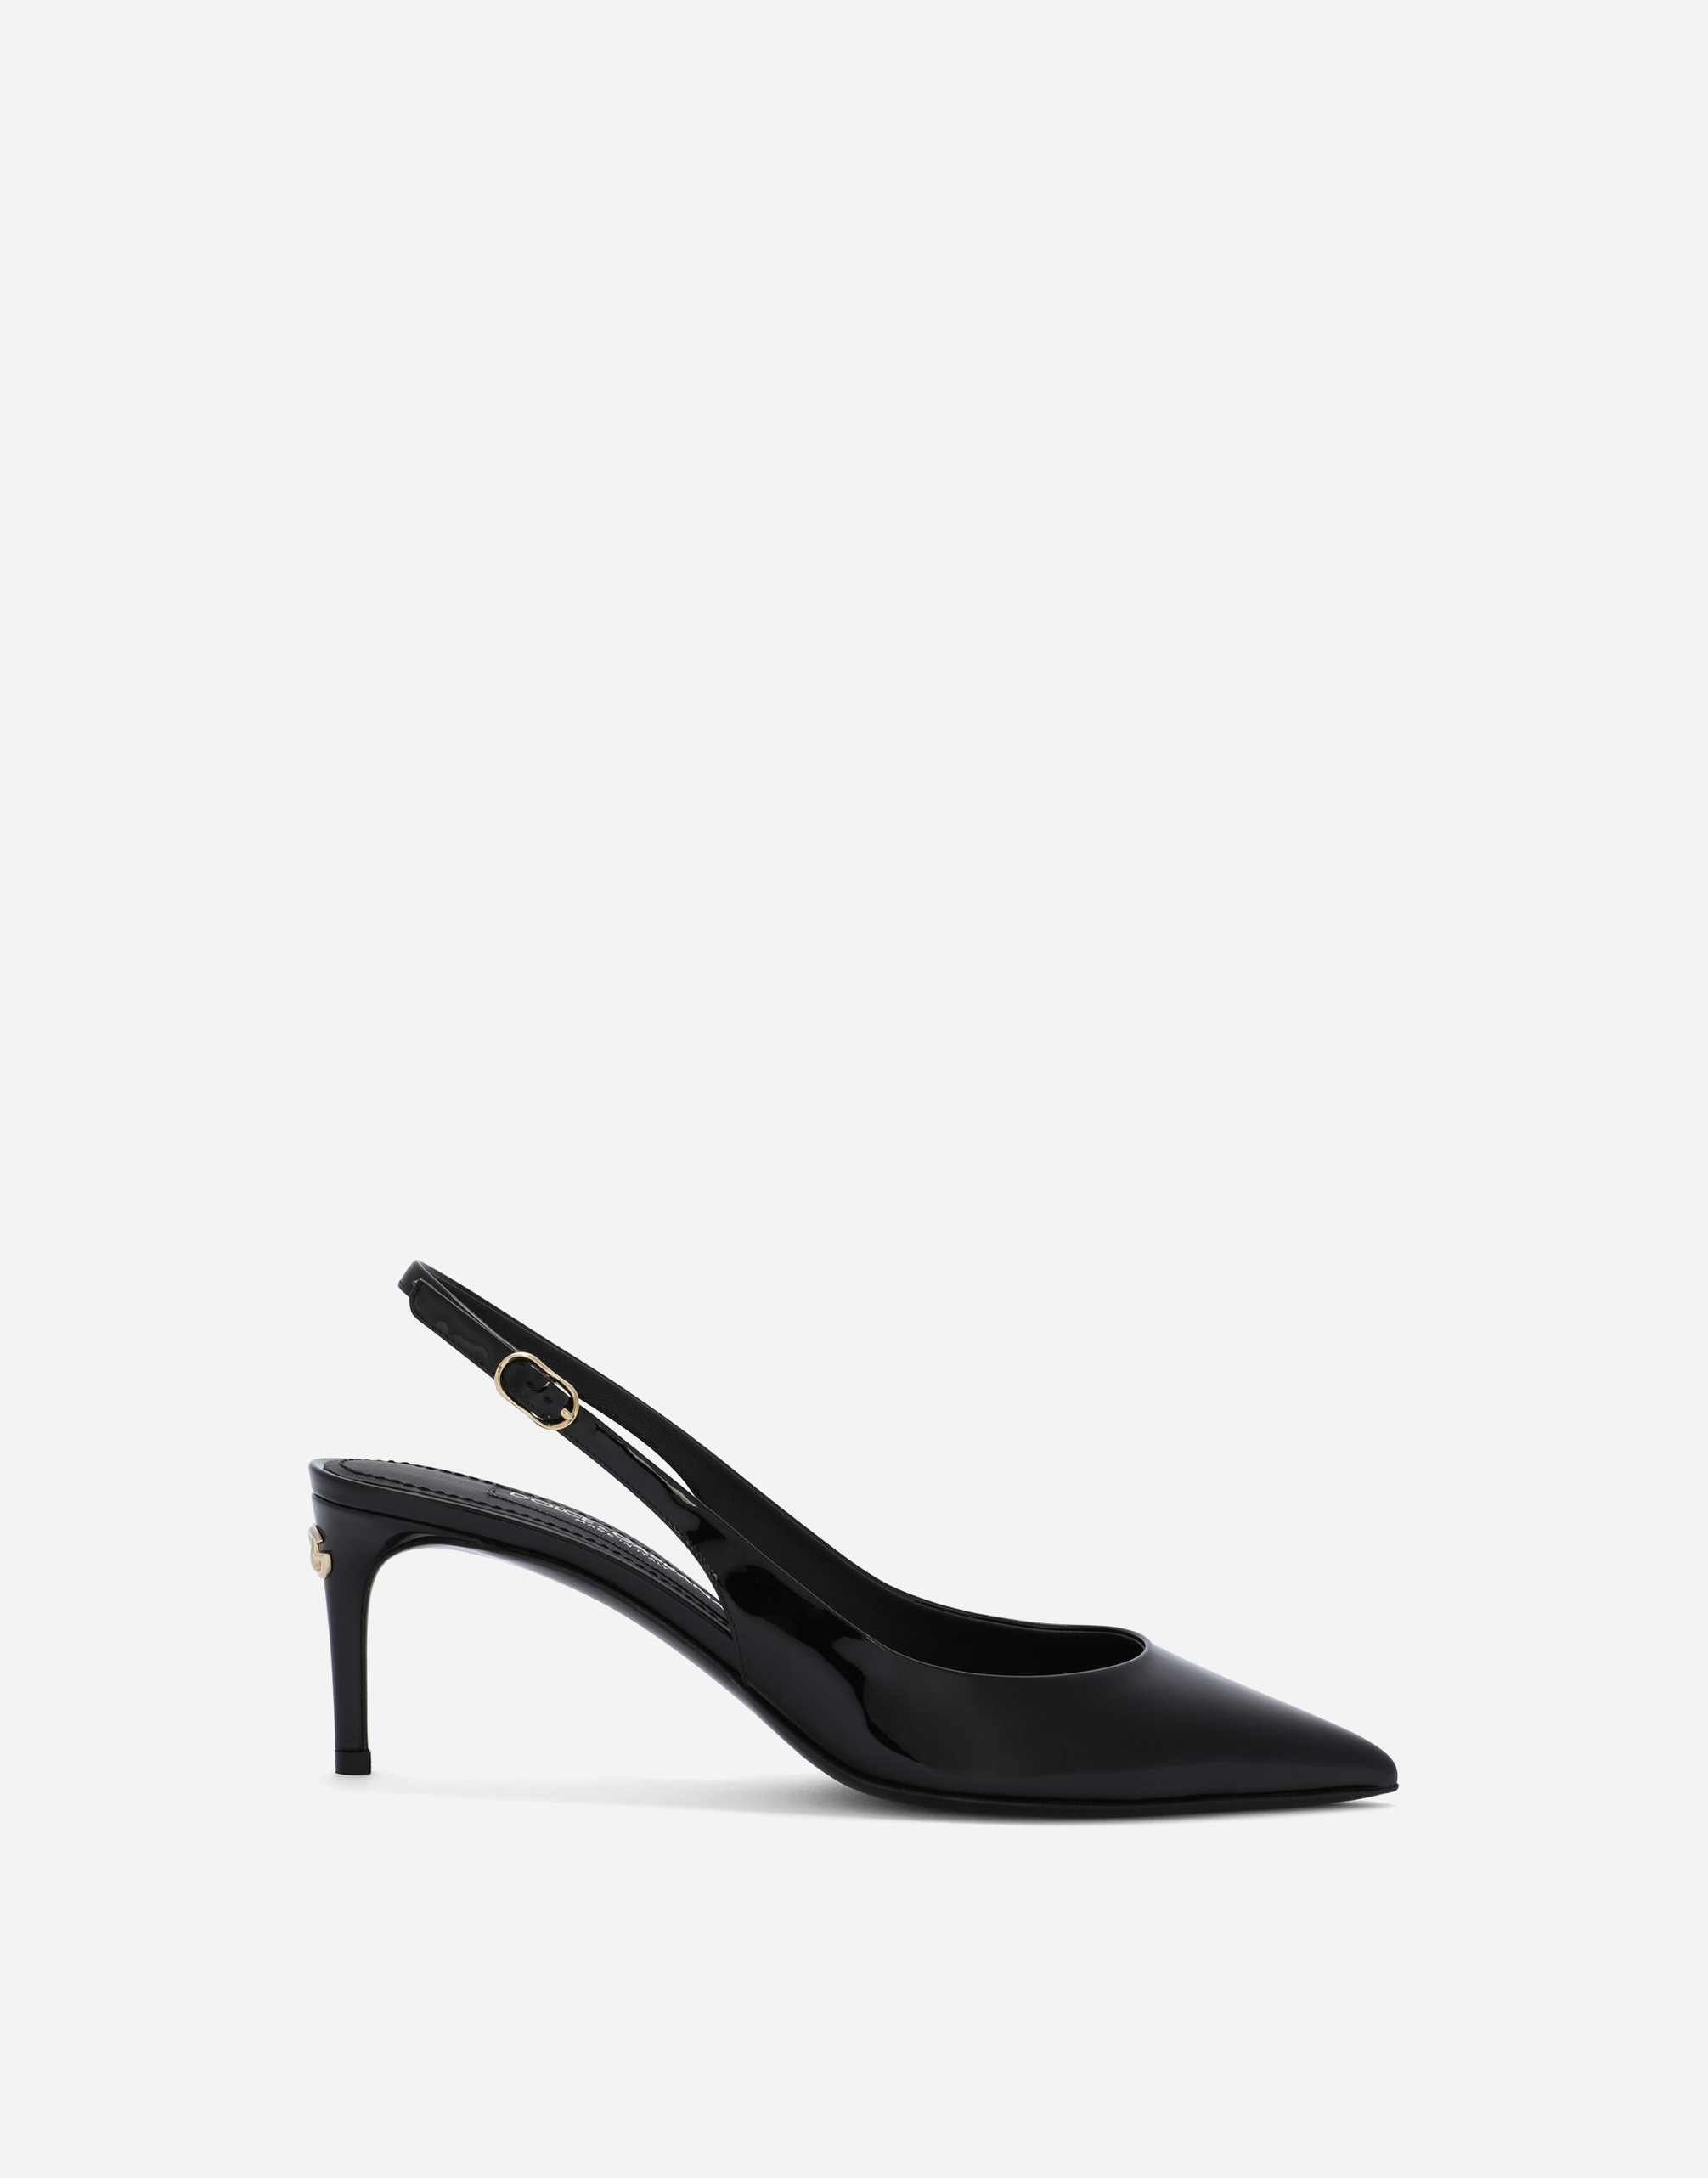 Patent leather Cardinale slingbacks in Black